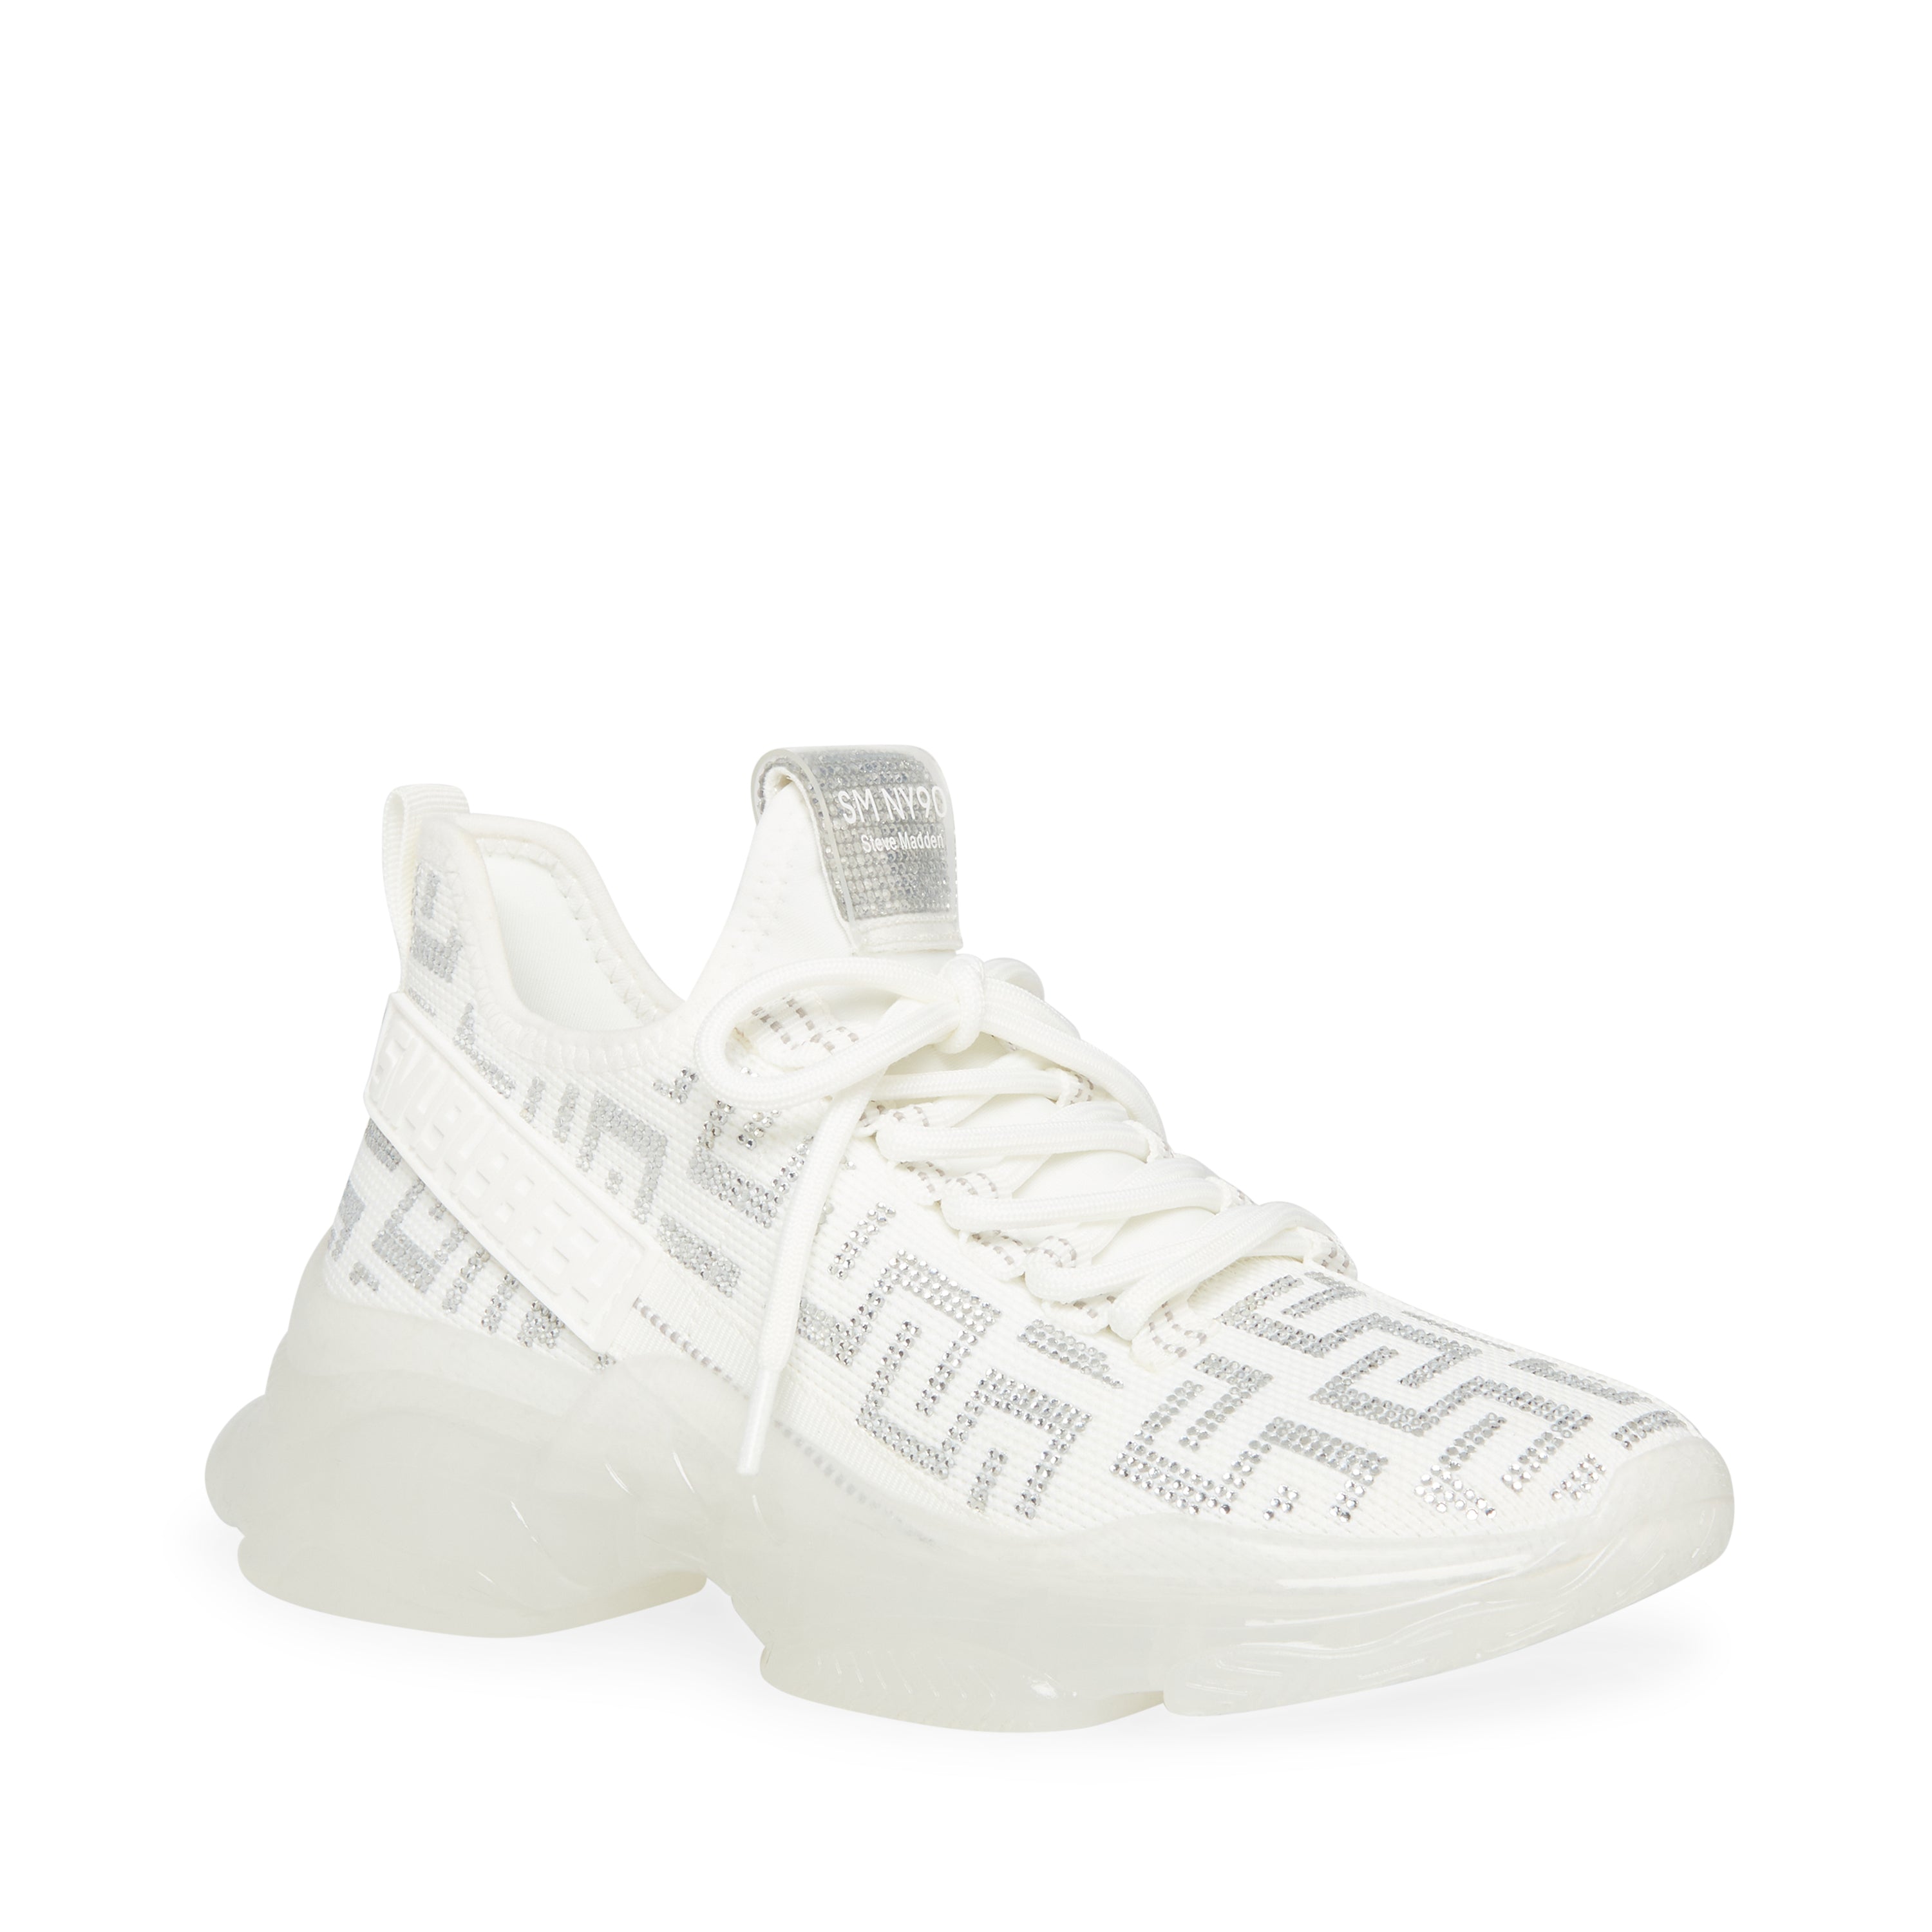 Maxout Sneaker White- Hover Image